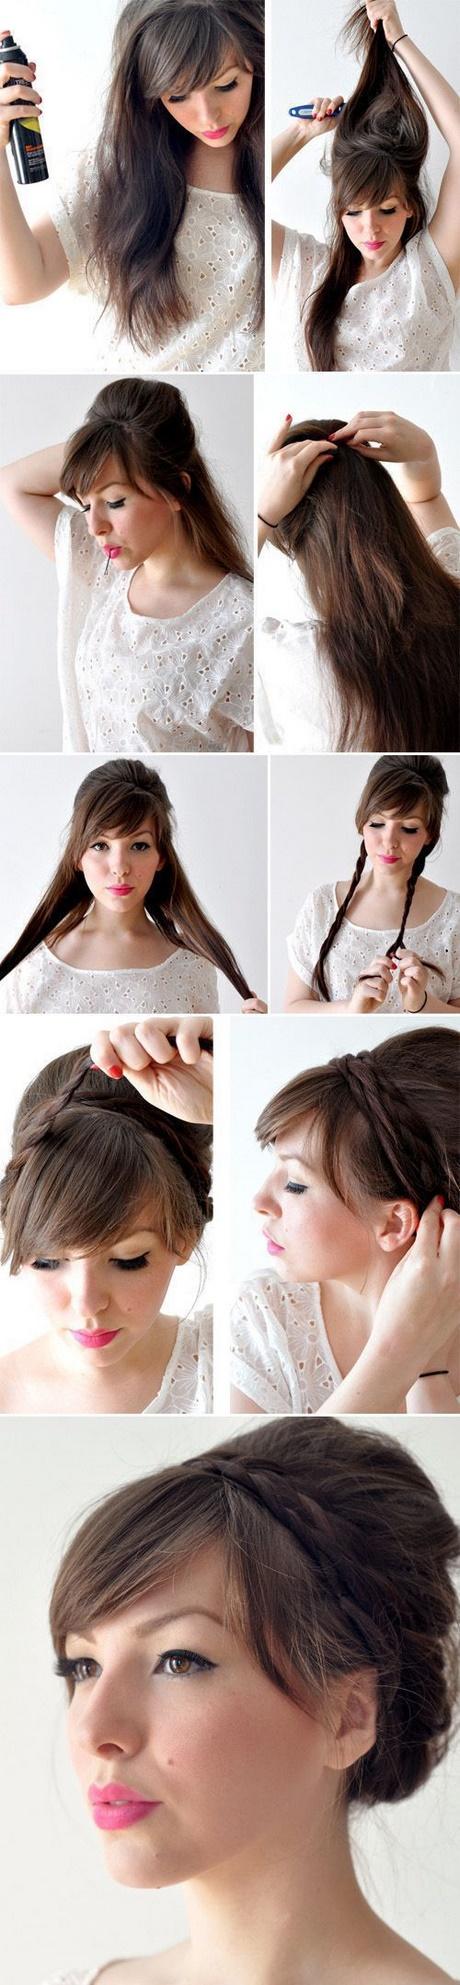 Different easy hairstyles to do at home different-easy-hairstyles-to-do-at-home-41_13